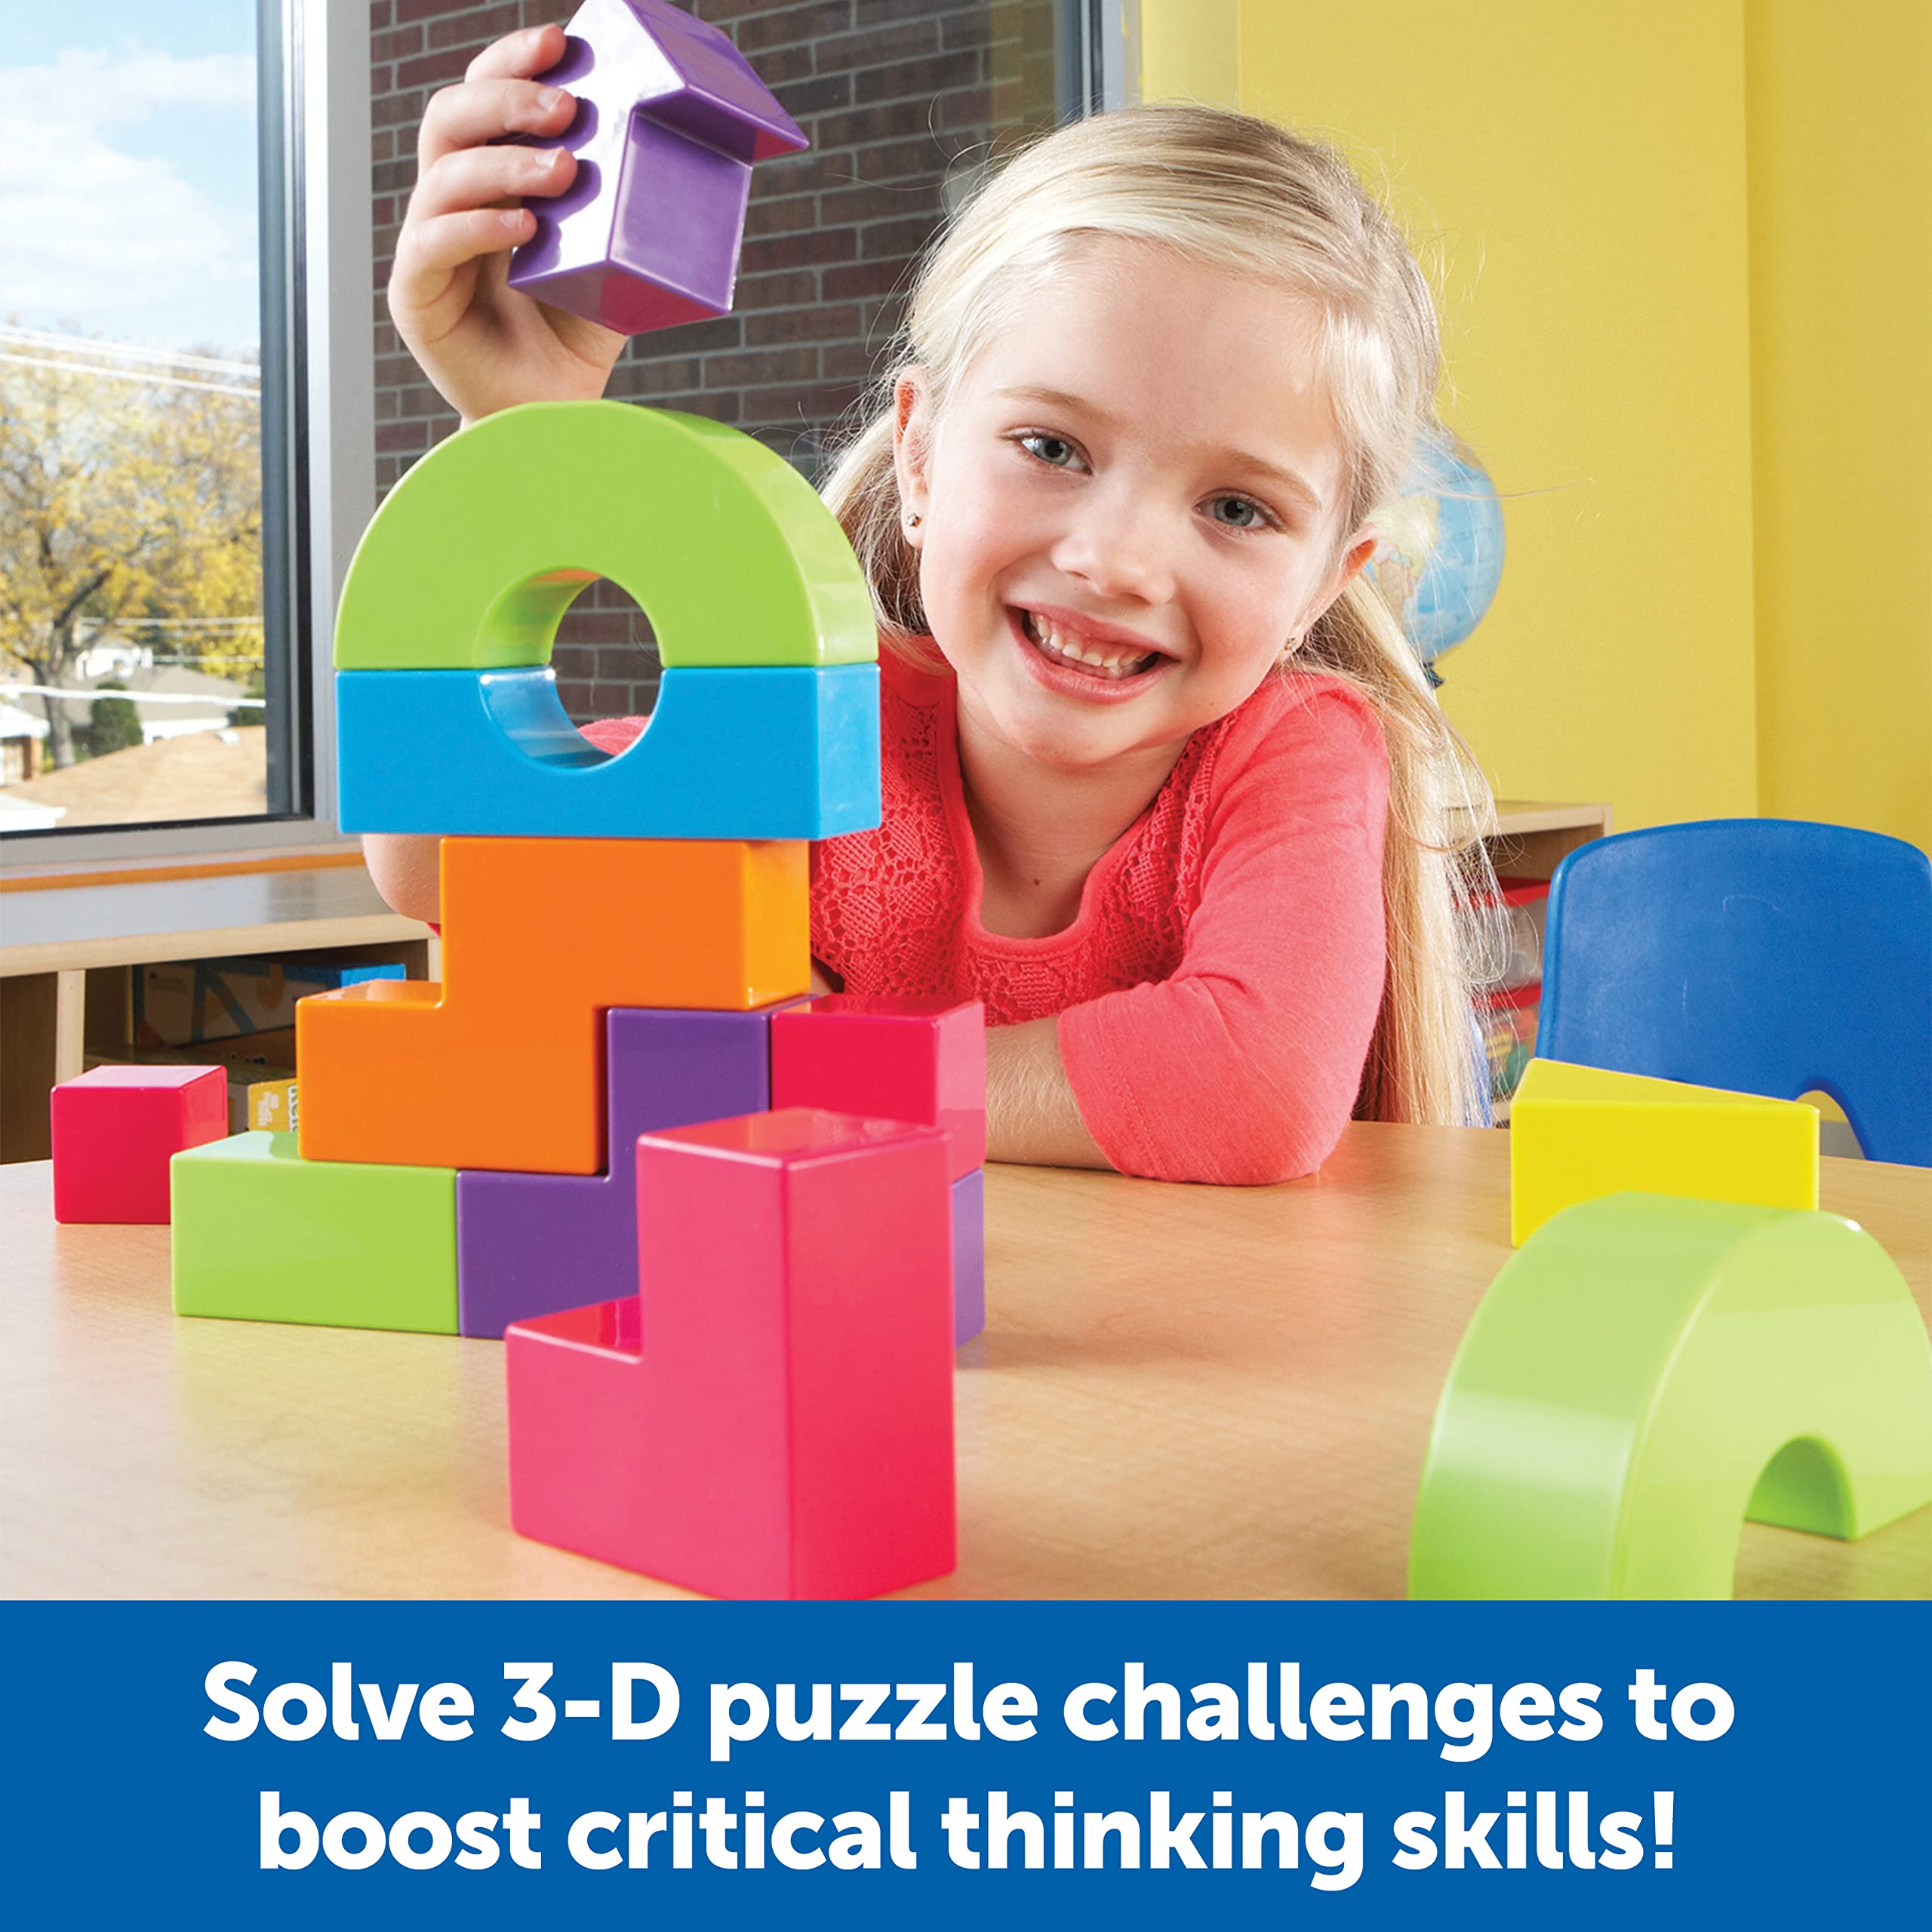 Learning Resources Mental Blox 360 Degree 3-D Building Game - 55 Pieces, Ages 5+ Educational Board Games, Mental Puzzles for Kids, Brain Teaser Games